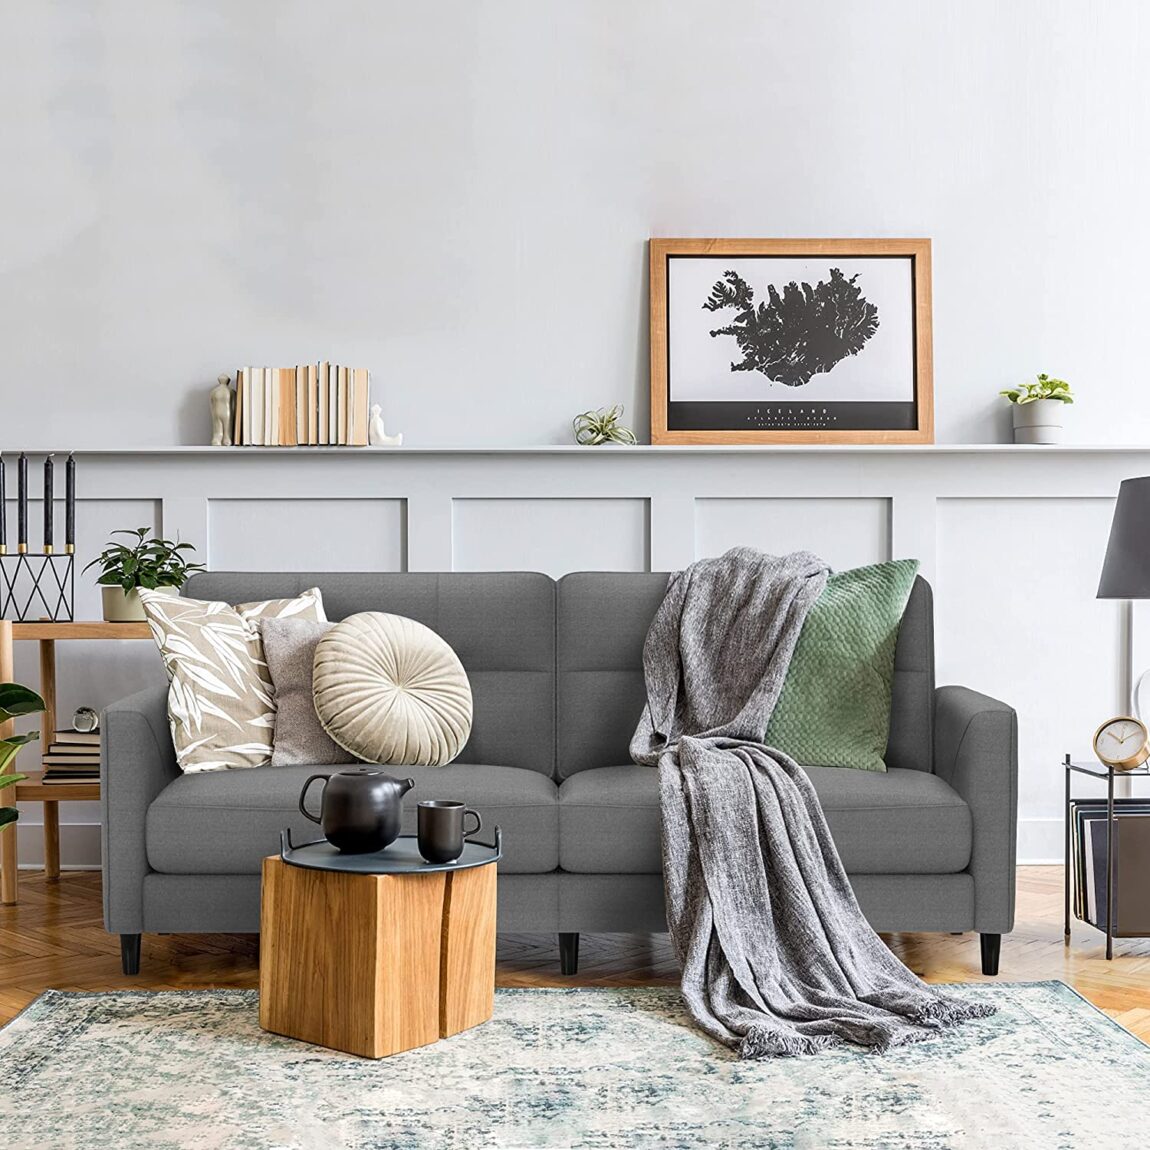 The Best Rated Sofas Under $300! I love finding great deals on furniture, especially for the renters out there. I decided working on an extremely low budget of $300 or less would be a great idea to help some out there that don't have a lot of money to throw at furniture like a sofa. I sure didn't when I was in my first apartment.